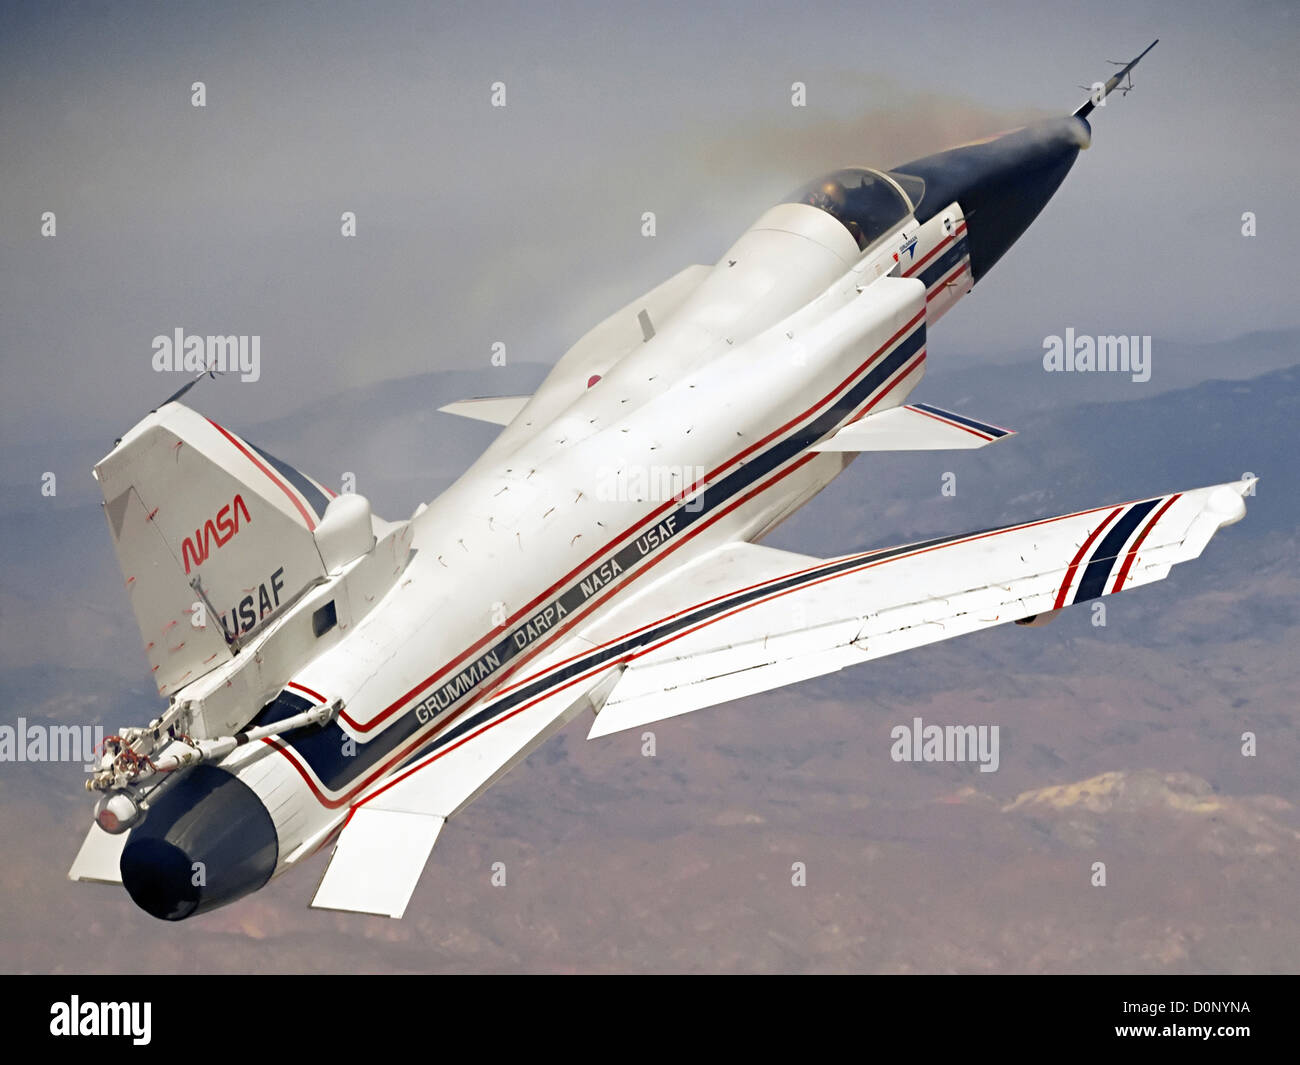 X-29 at High Angle of Attack with Smoke Generators Stock Photo